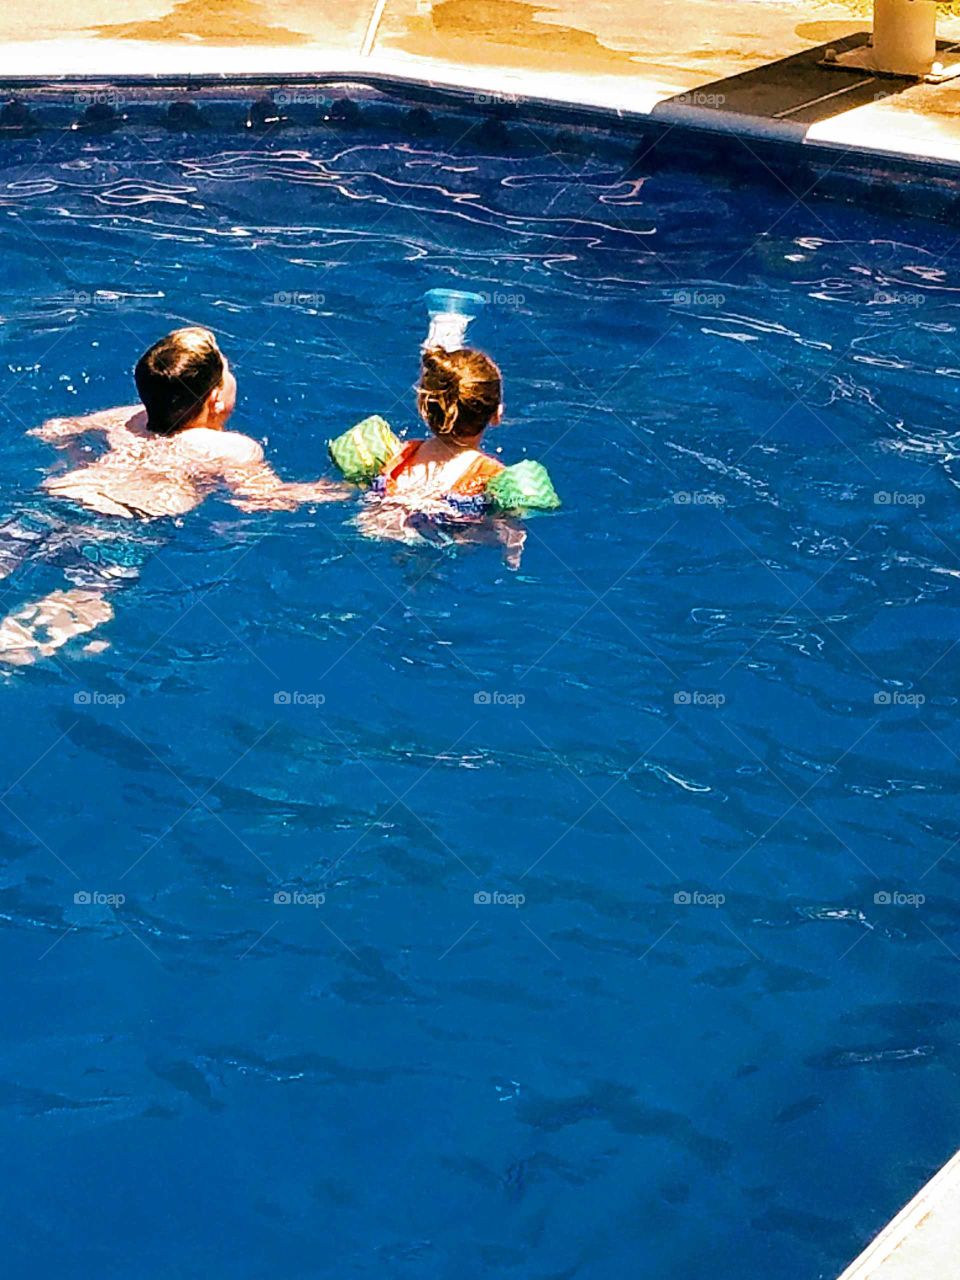 Big Brother, Little Brother
Big Bro teaching Little how to swim